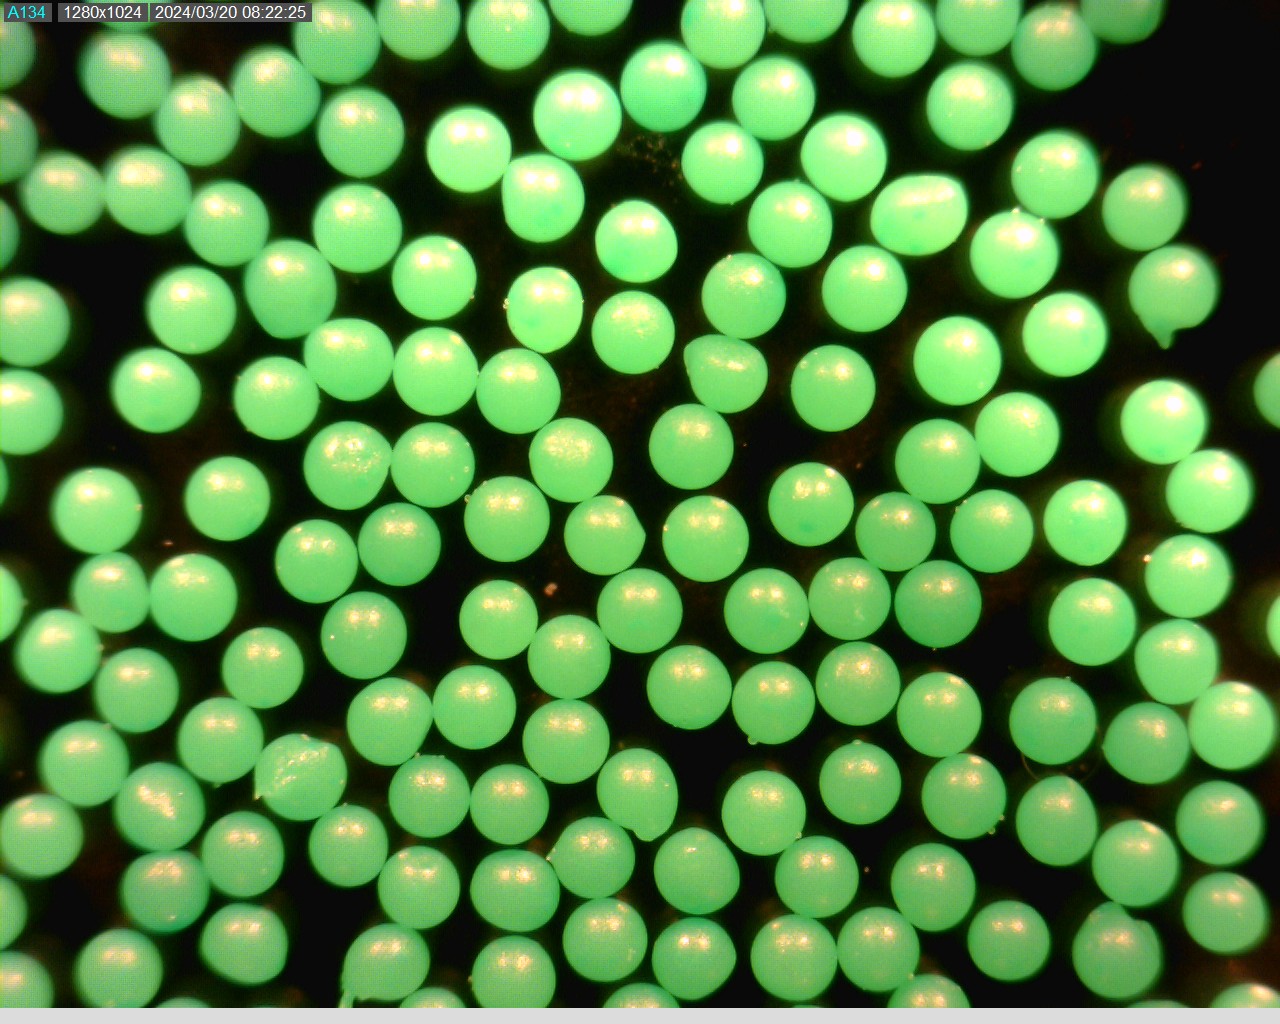 Fluorescent Green Polyethylene Microspheres, Beads, Particles